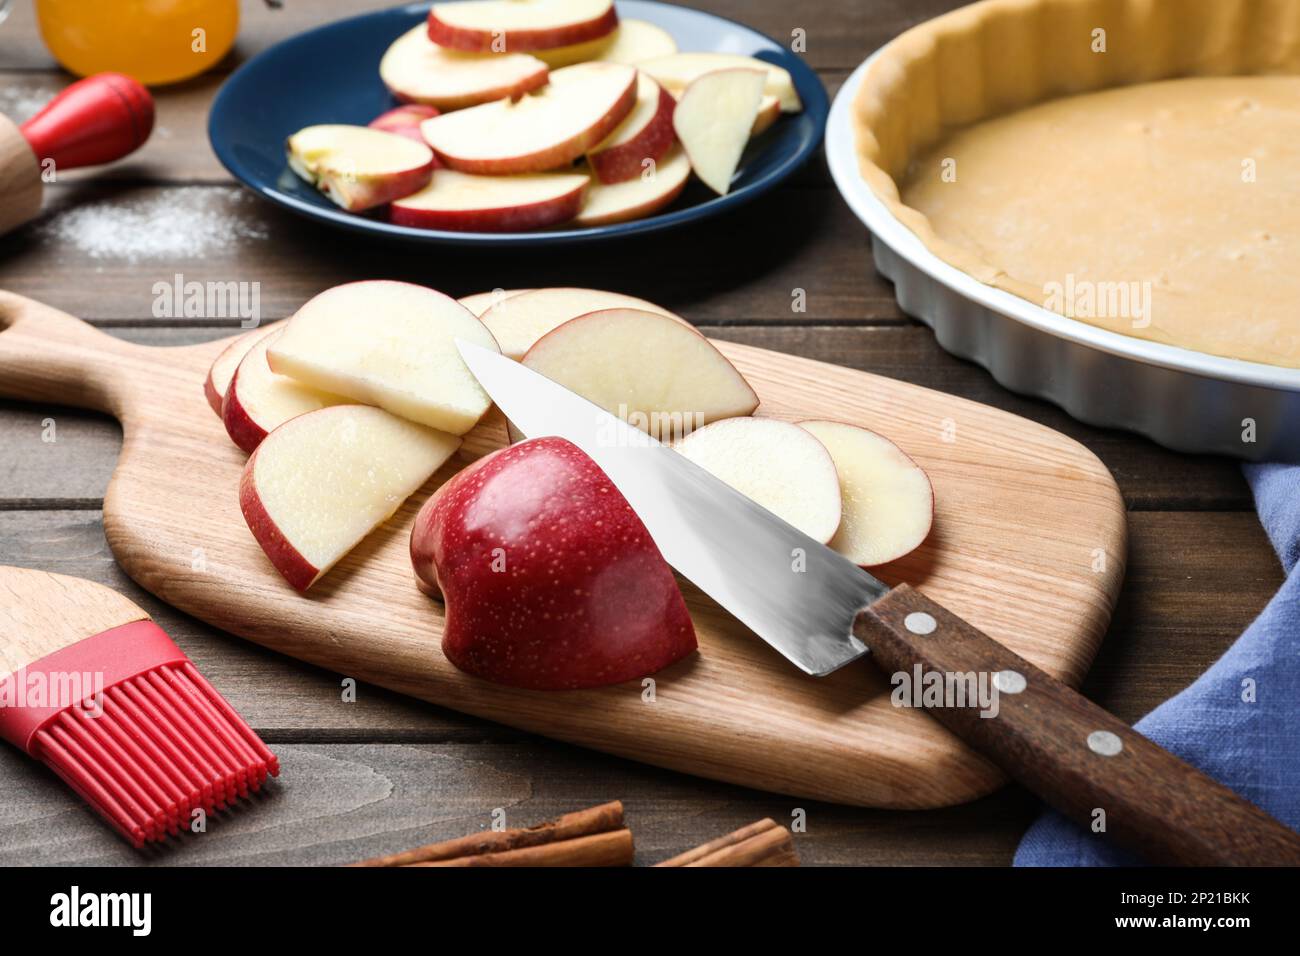 Cut fresh apple with knife and board on wooden table. Baking pie Stock Photo